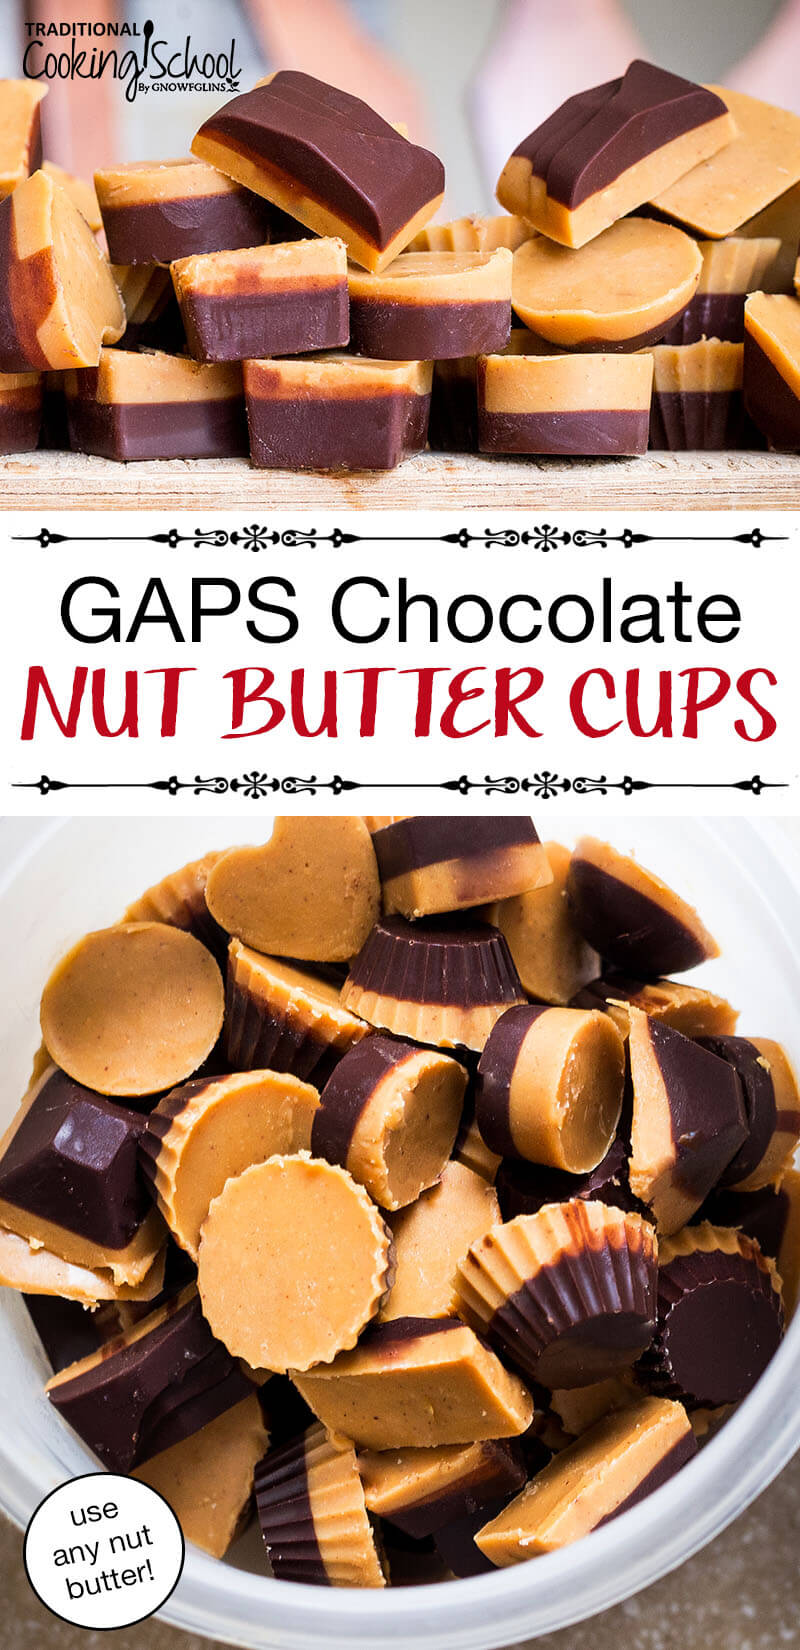 Chocolate Nut Butter Cups | Gapsdiet friendly and delicious. | TraditionalCookingSchool.com